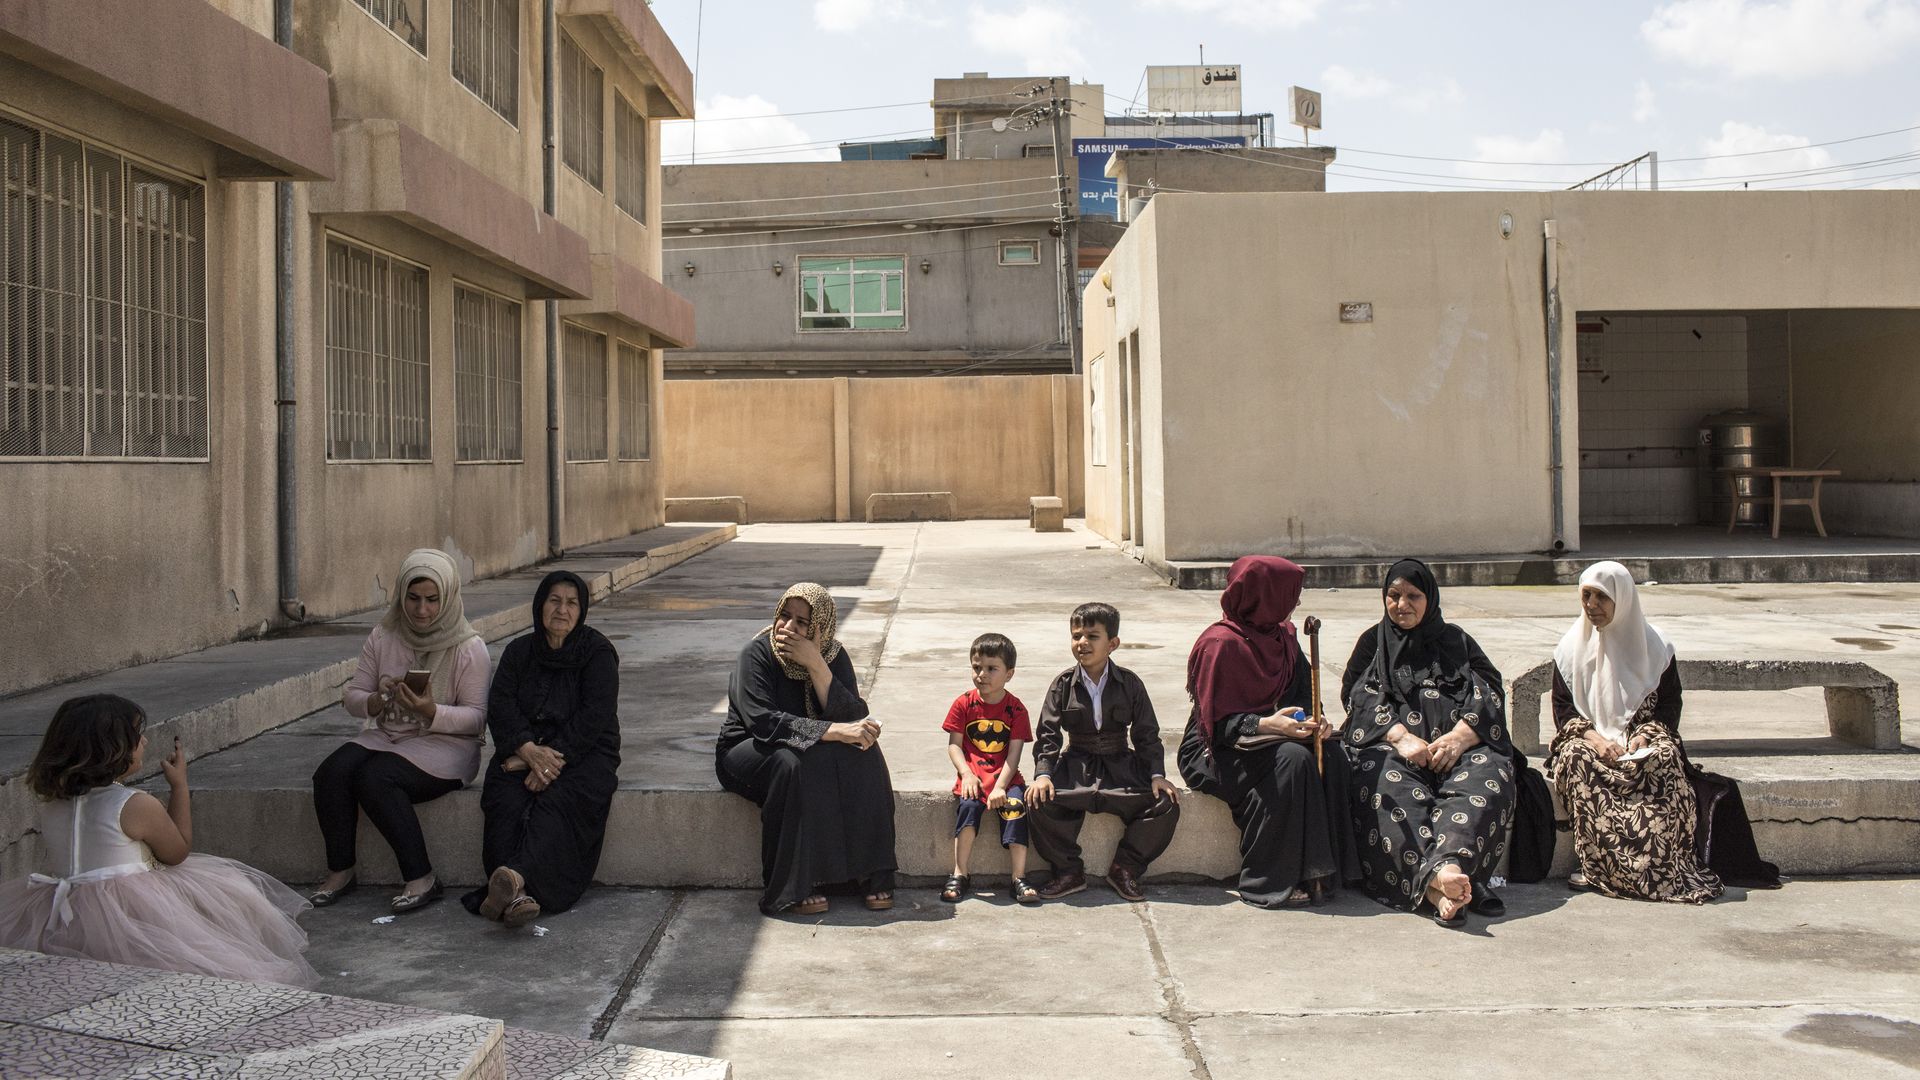 Women and children sit on a curb next to a building